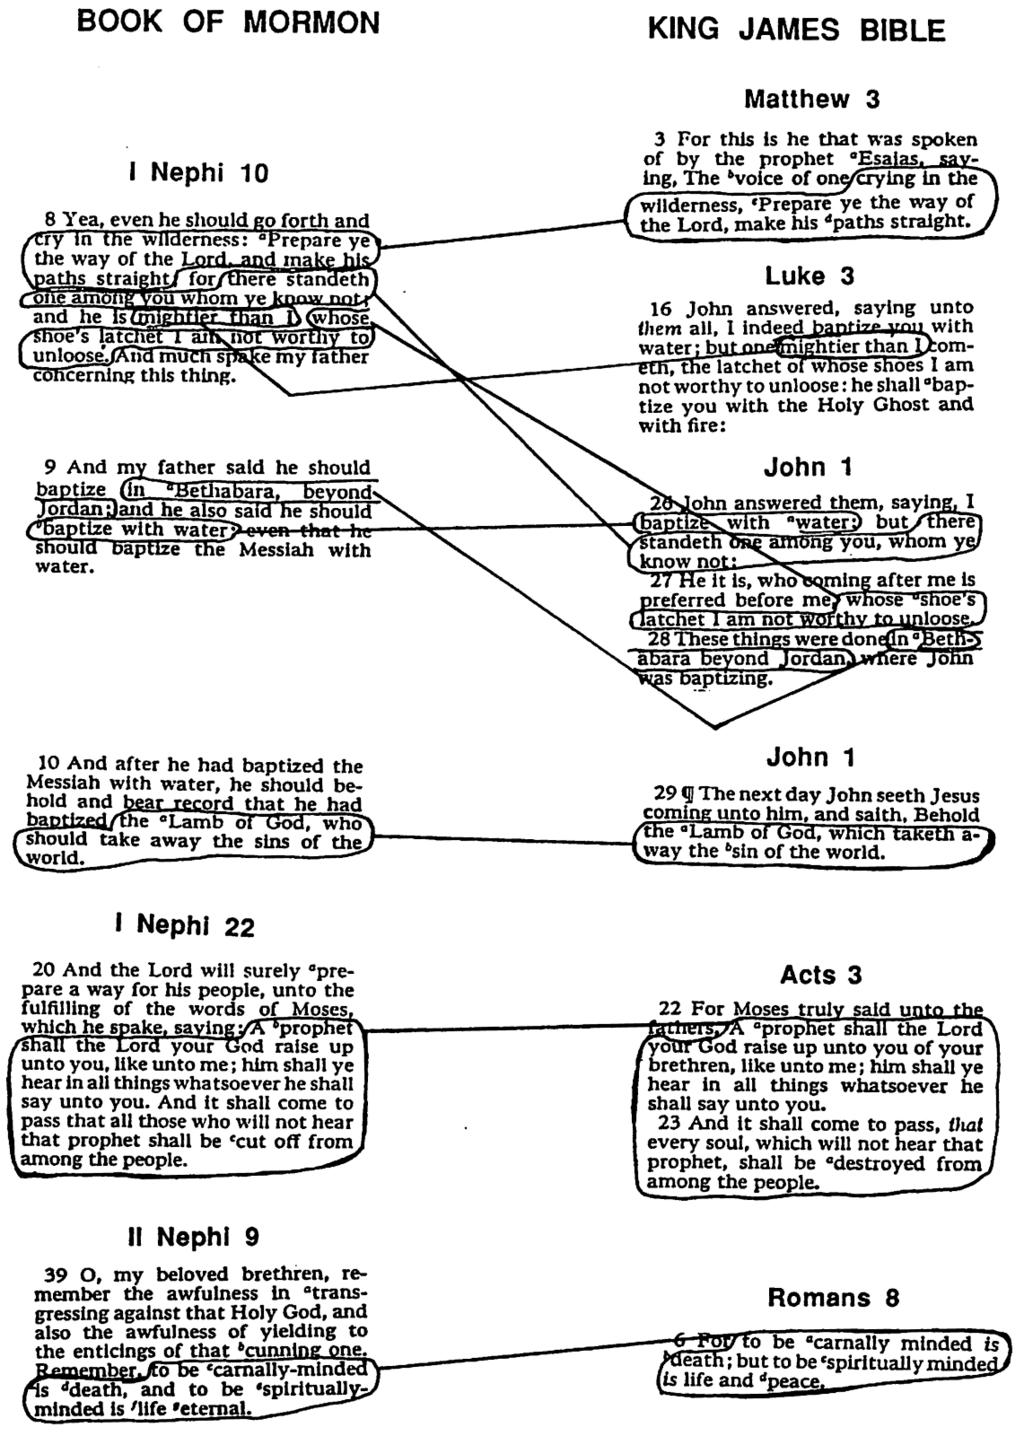 Issue 74 Salt Lake City Messenger 5 Selected verses from the Book of Mormon compared with Bible verses which appear in the King James Version first printed in 1611 A.